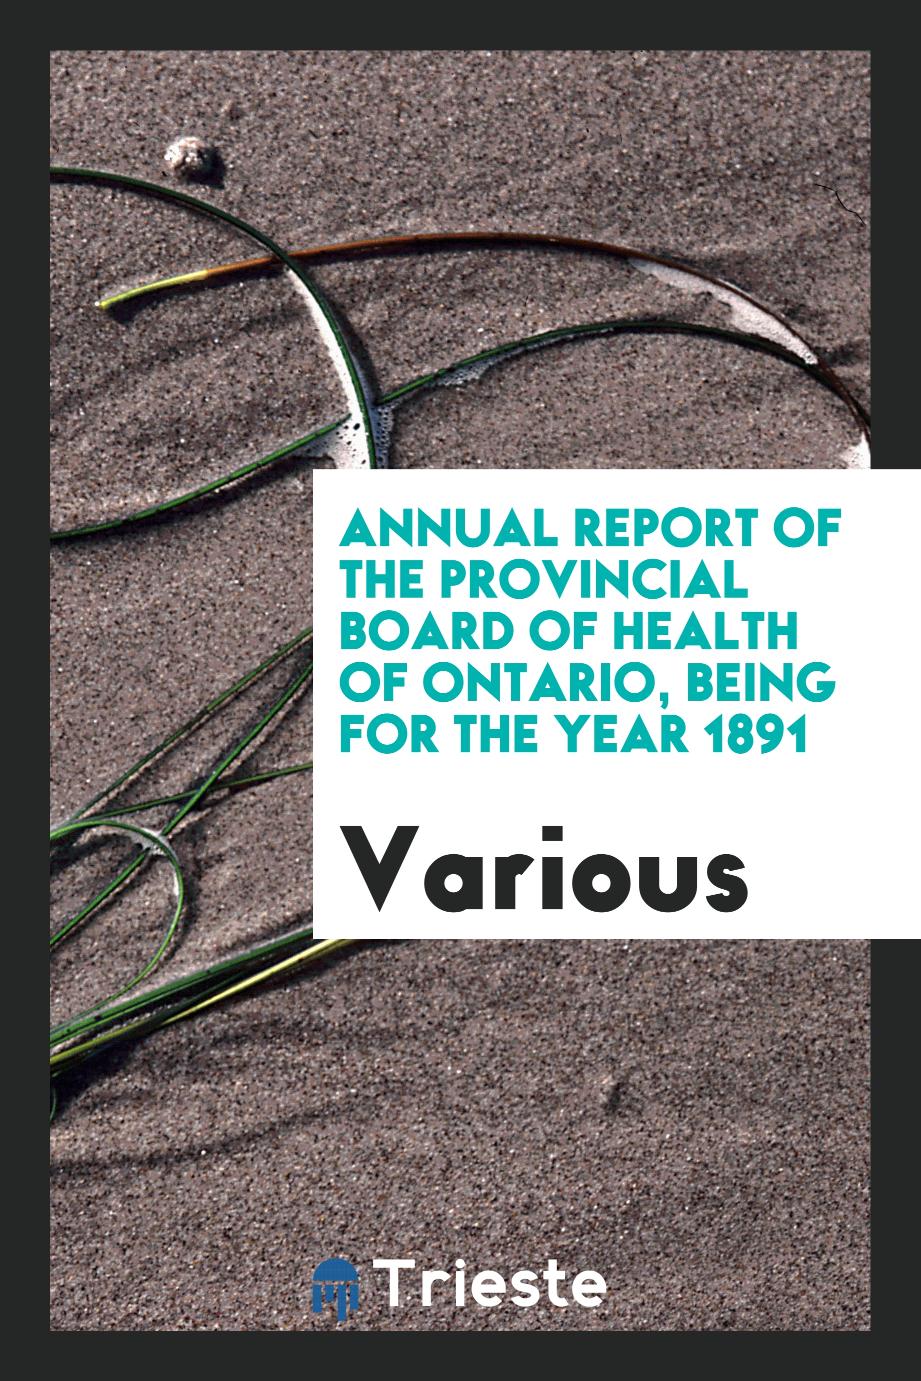 Annual Report of the Provincial Board of Health of Ontario, Being for the Year 1891